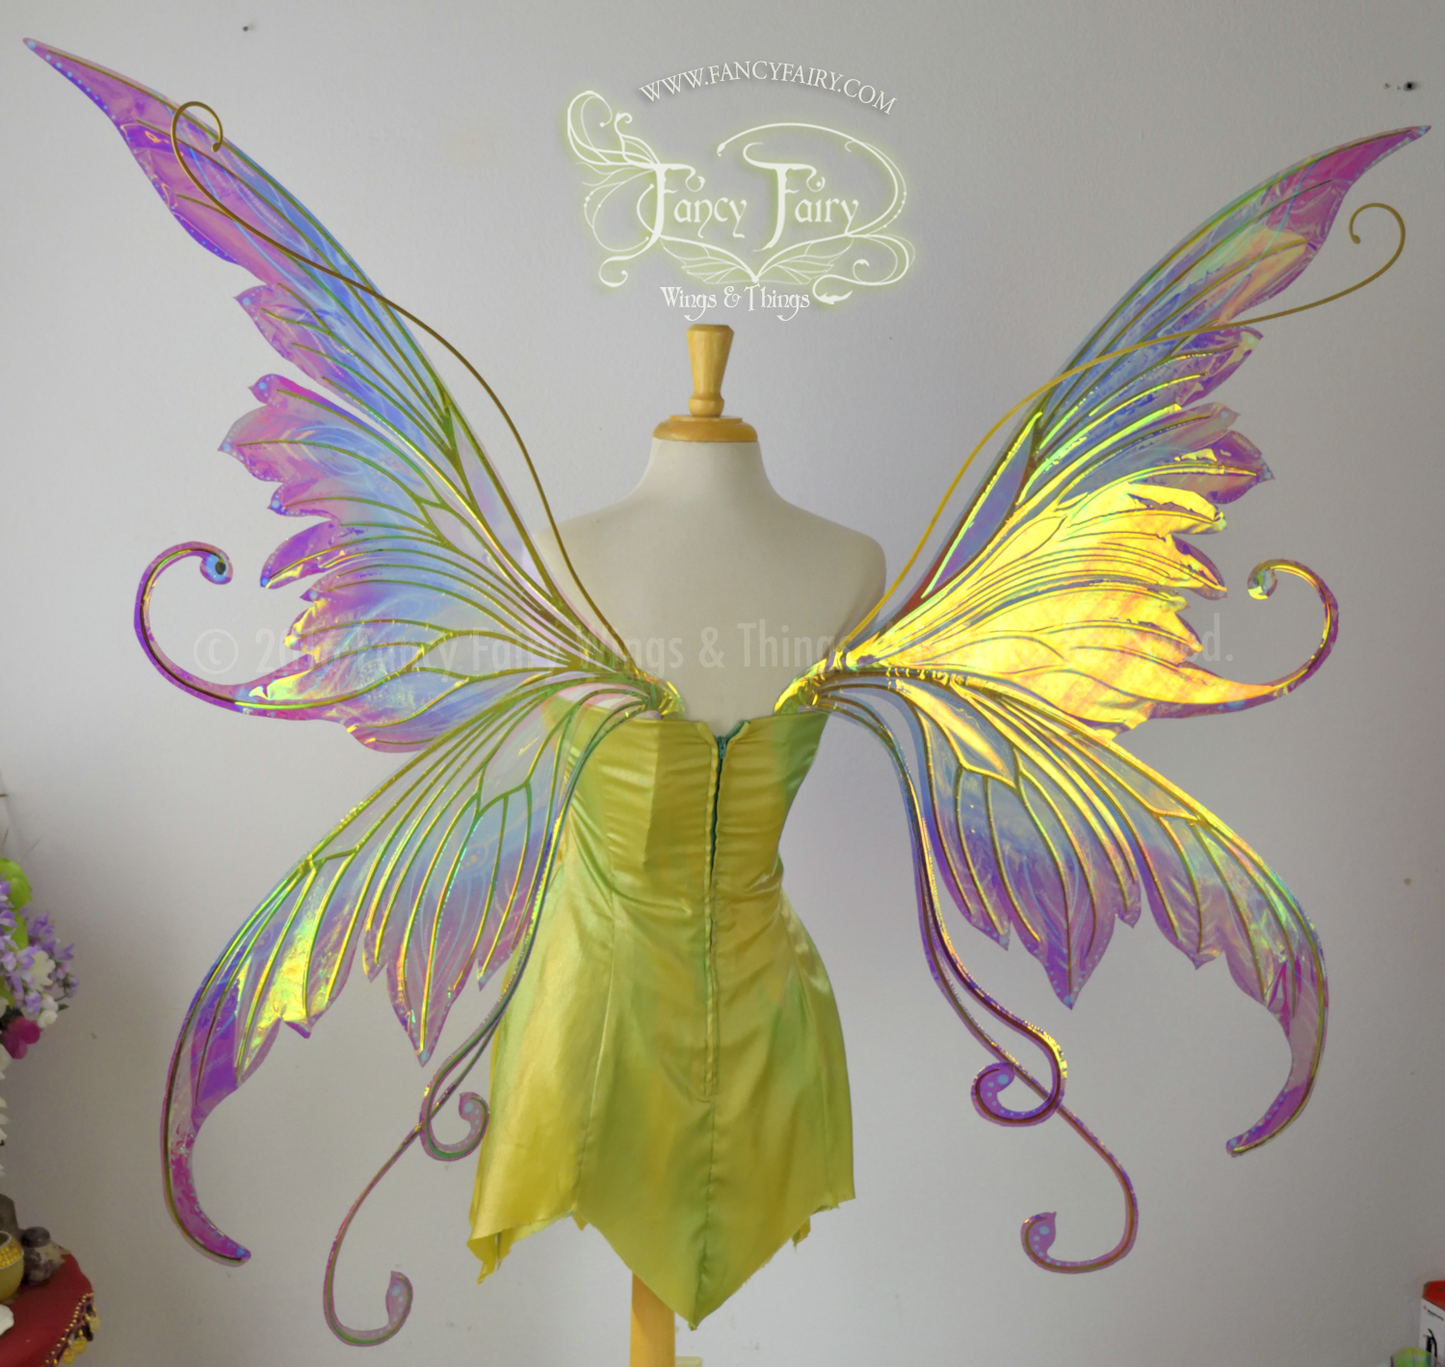 Made to Order Set of Extra Large / Giant Fairy Wings (limited selection)